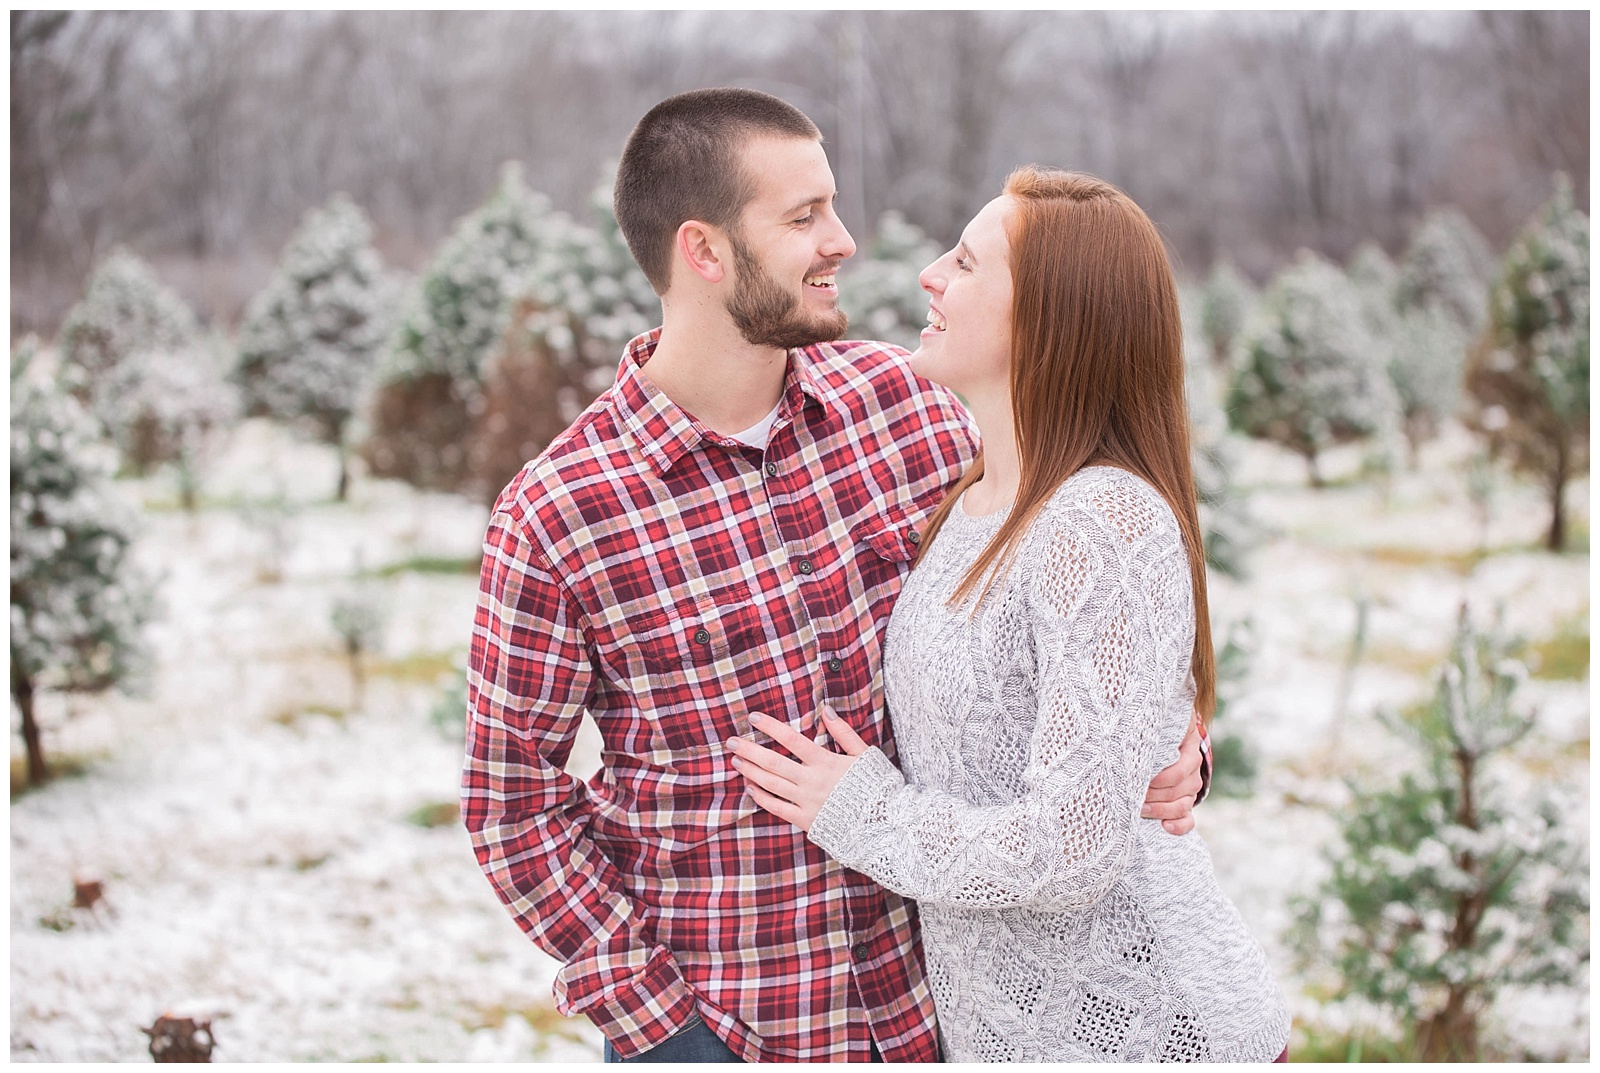 Tree Farm Proposal in Columbus, Newly Engaged | Monica Brown Photography | monicabrownphoto.com